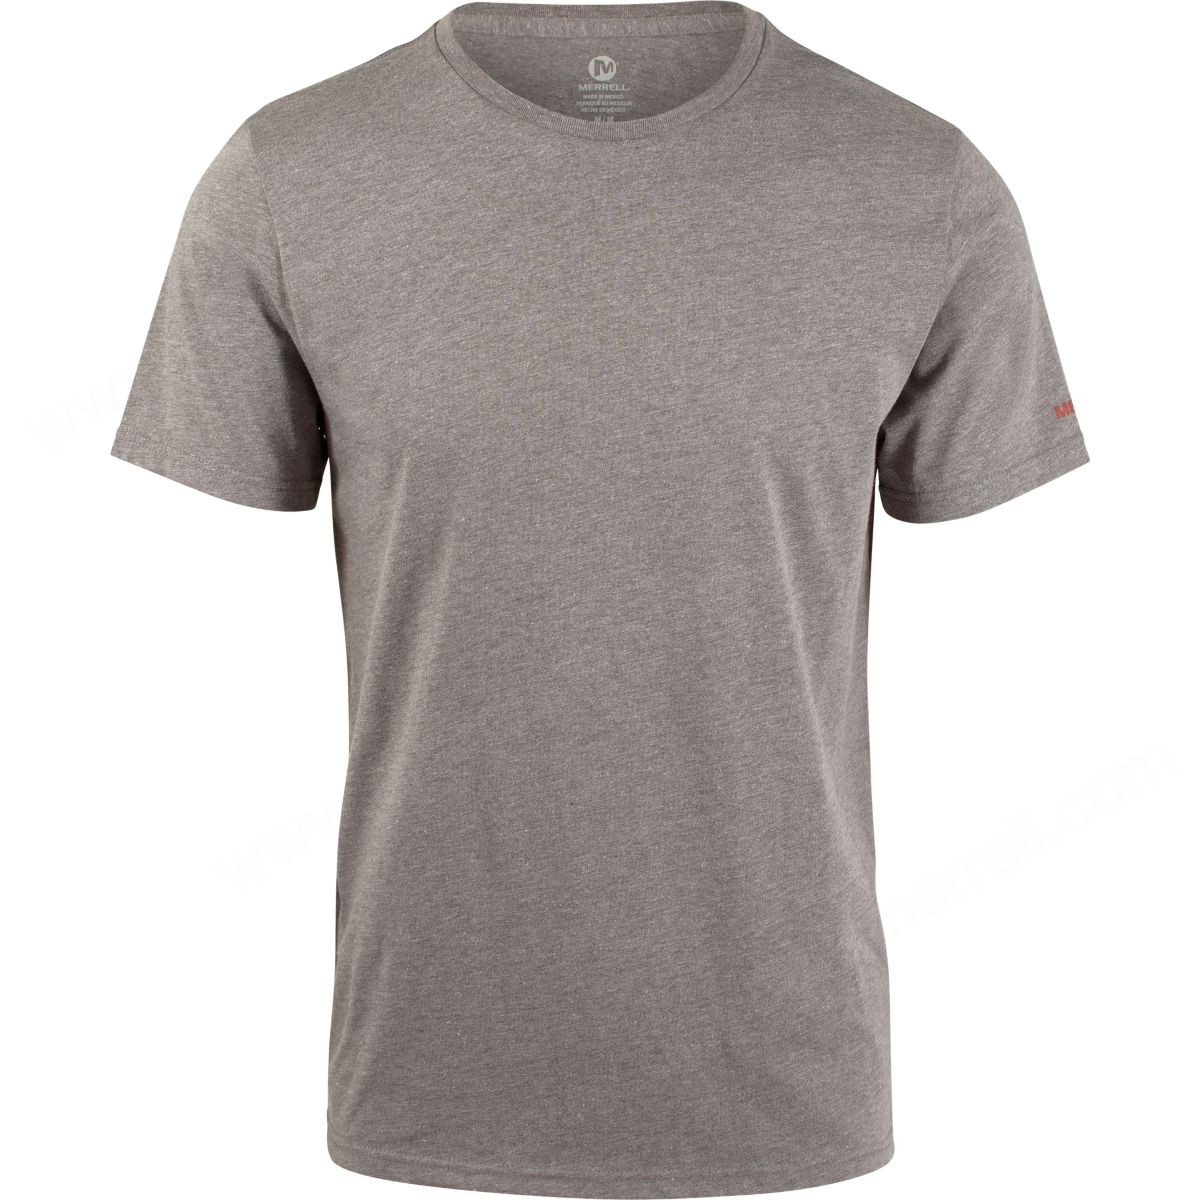 Merrell Mens's Packed Graphic Tees Heather Grey - -0